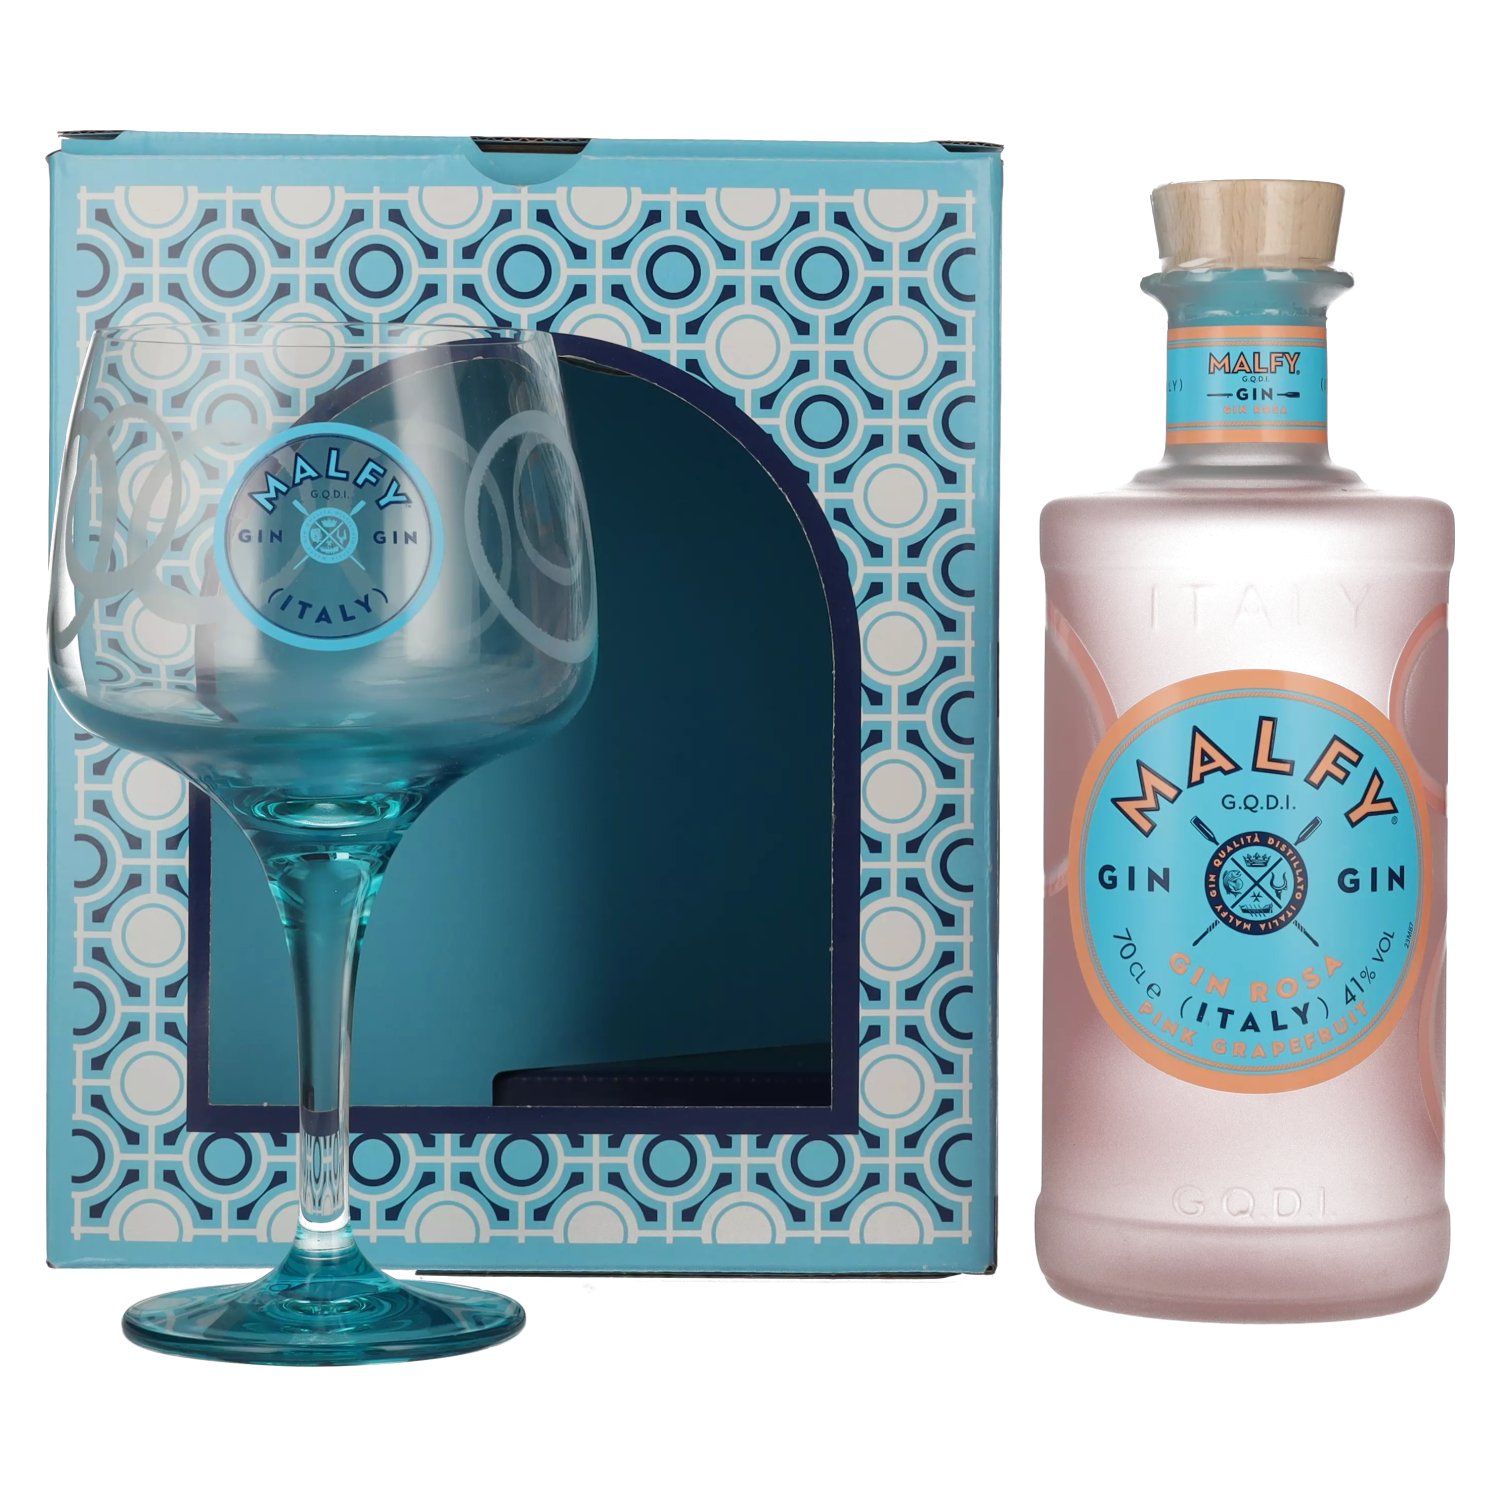 Giftbox 0,7l 41% glass in Pink Malfy Gin Sicilian with Vol. ROSA Grapefruit